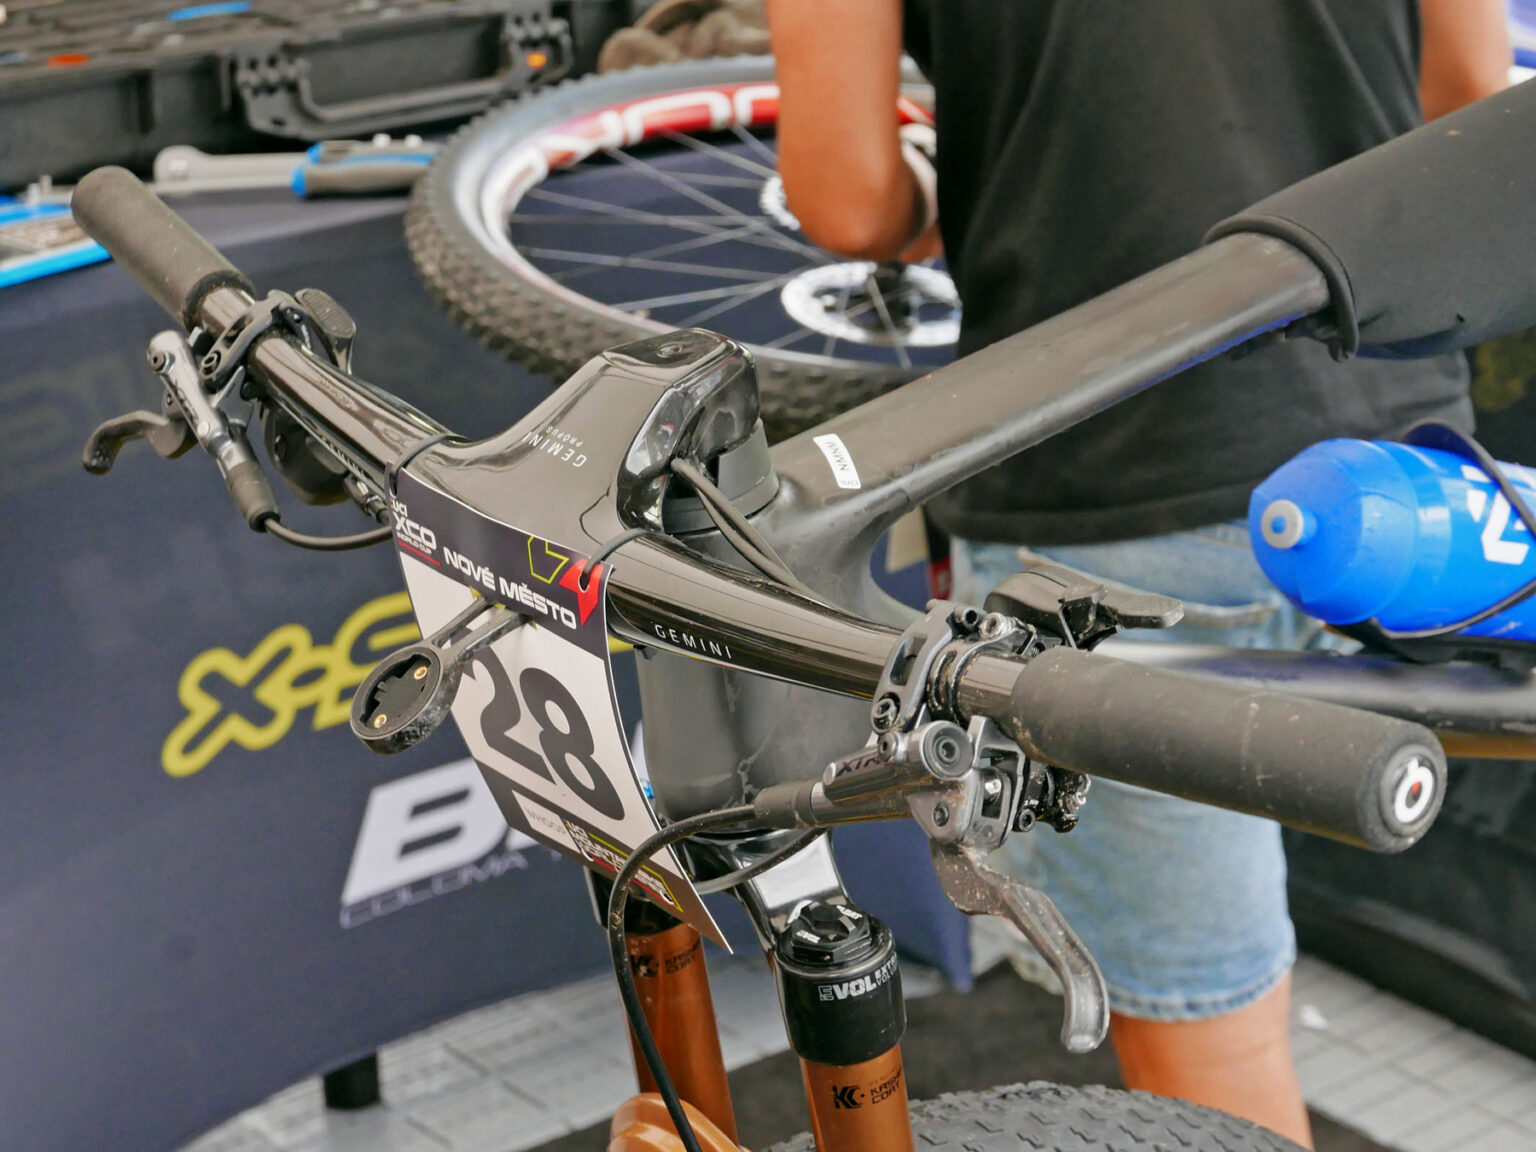 BH XC race carbon mountain bike prototype, likely Lynx Evo replacement raced in Nove Mesto World Cup, integrated cockpit with lots of cables